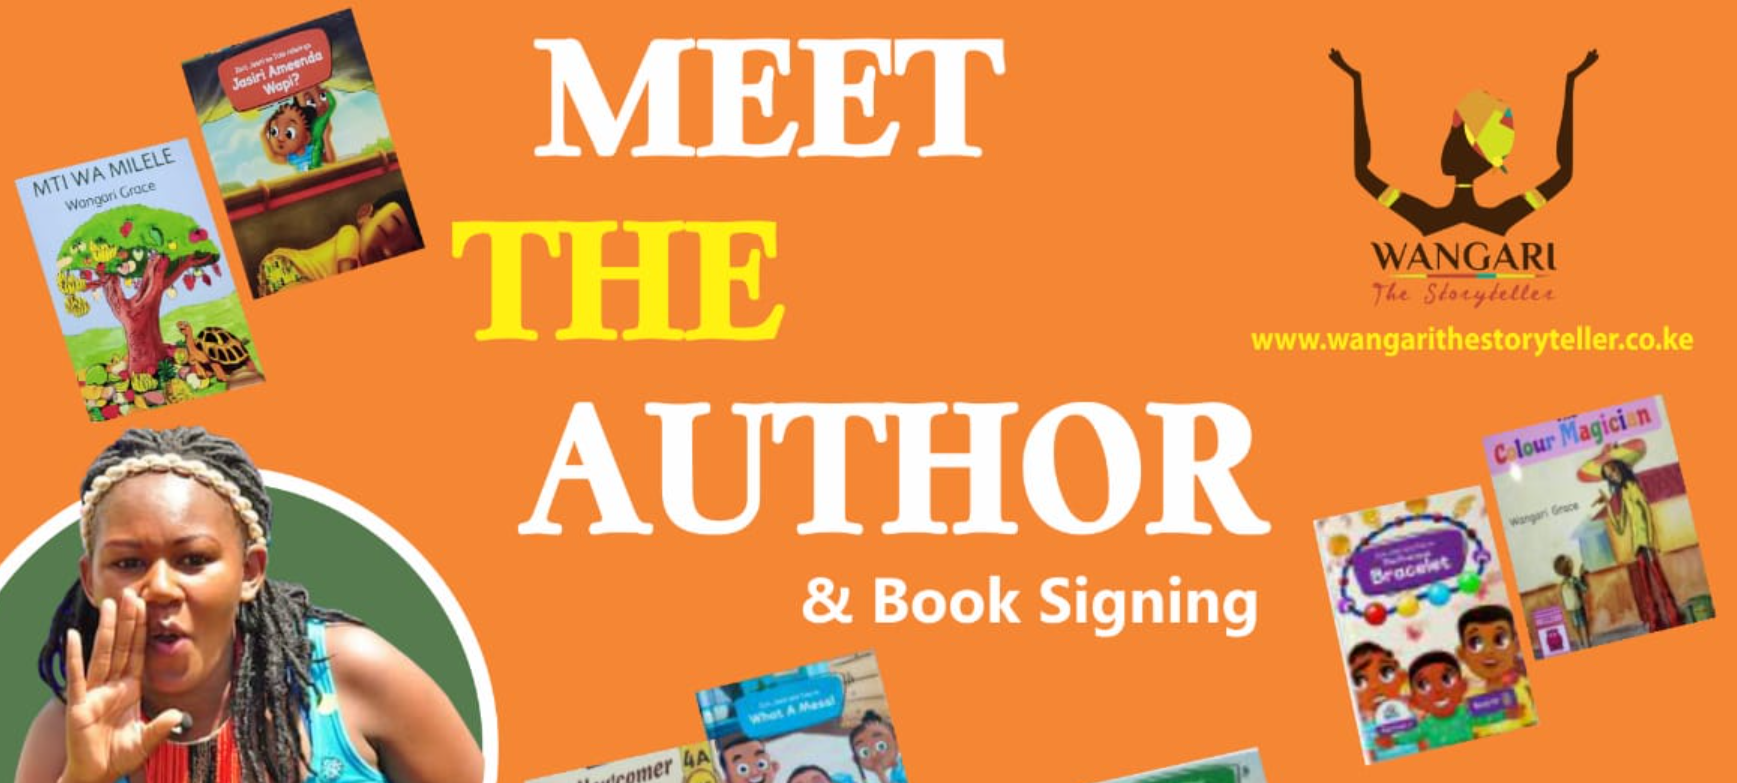 Meet the author: 'Wangari the Storyteller' book signing event at Alliance Française